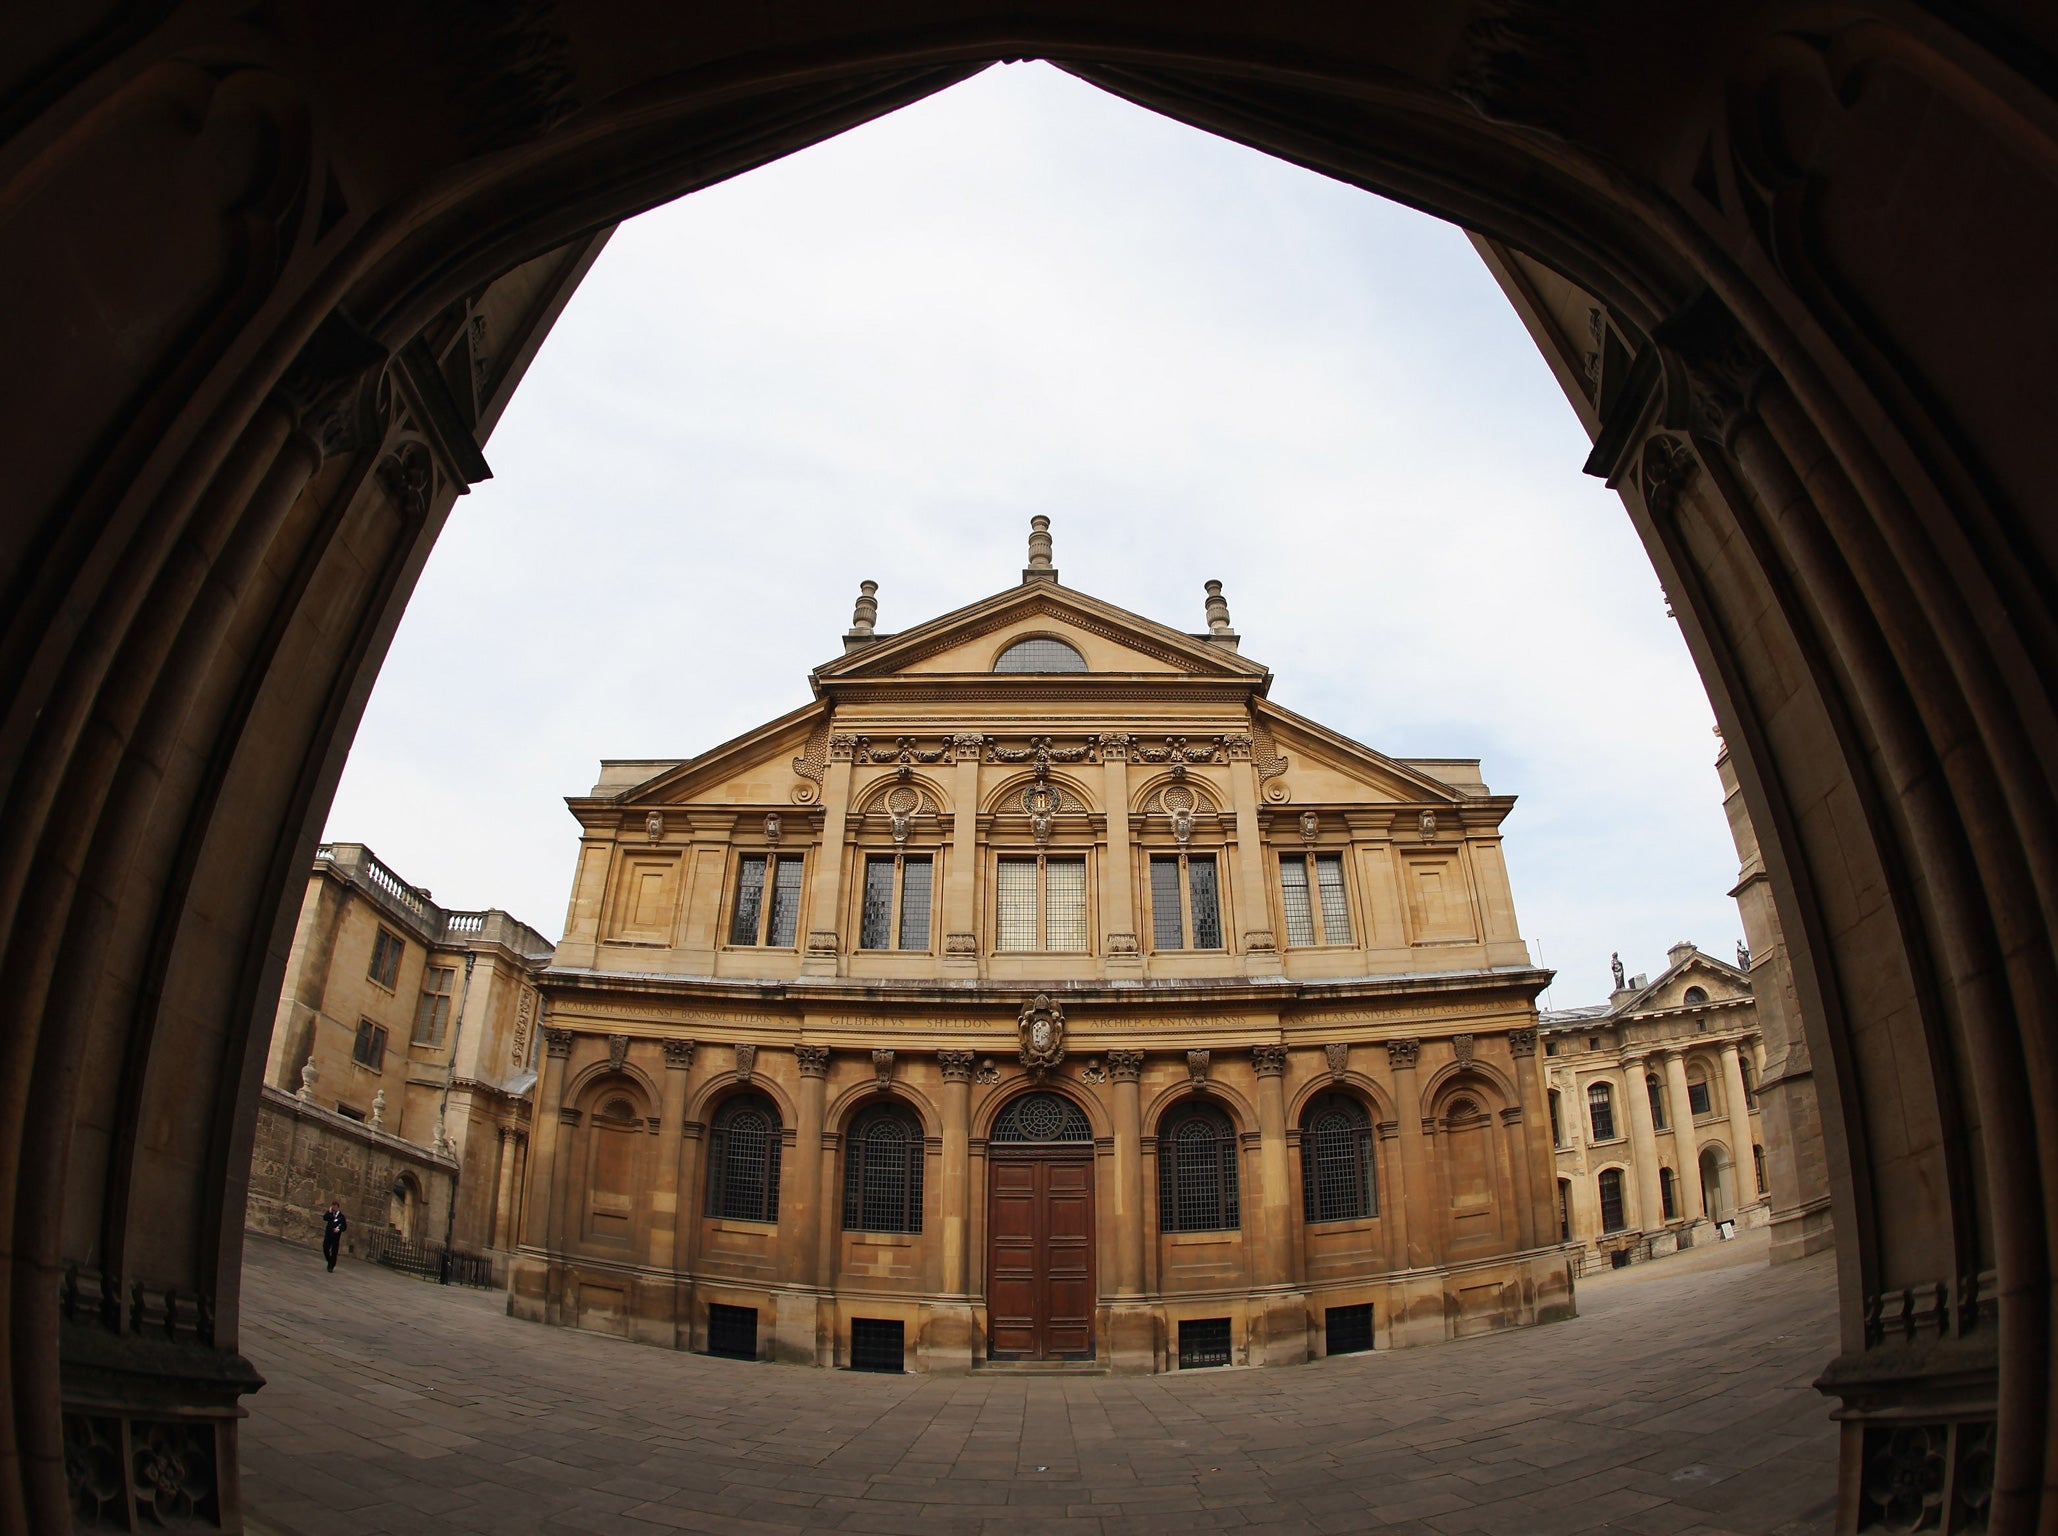 The Bodleian Library’s Clarendon Building in Oxford